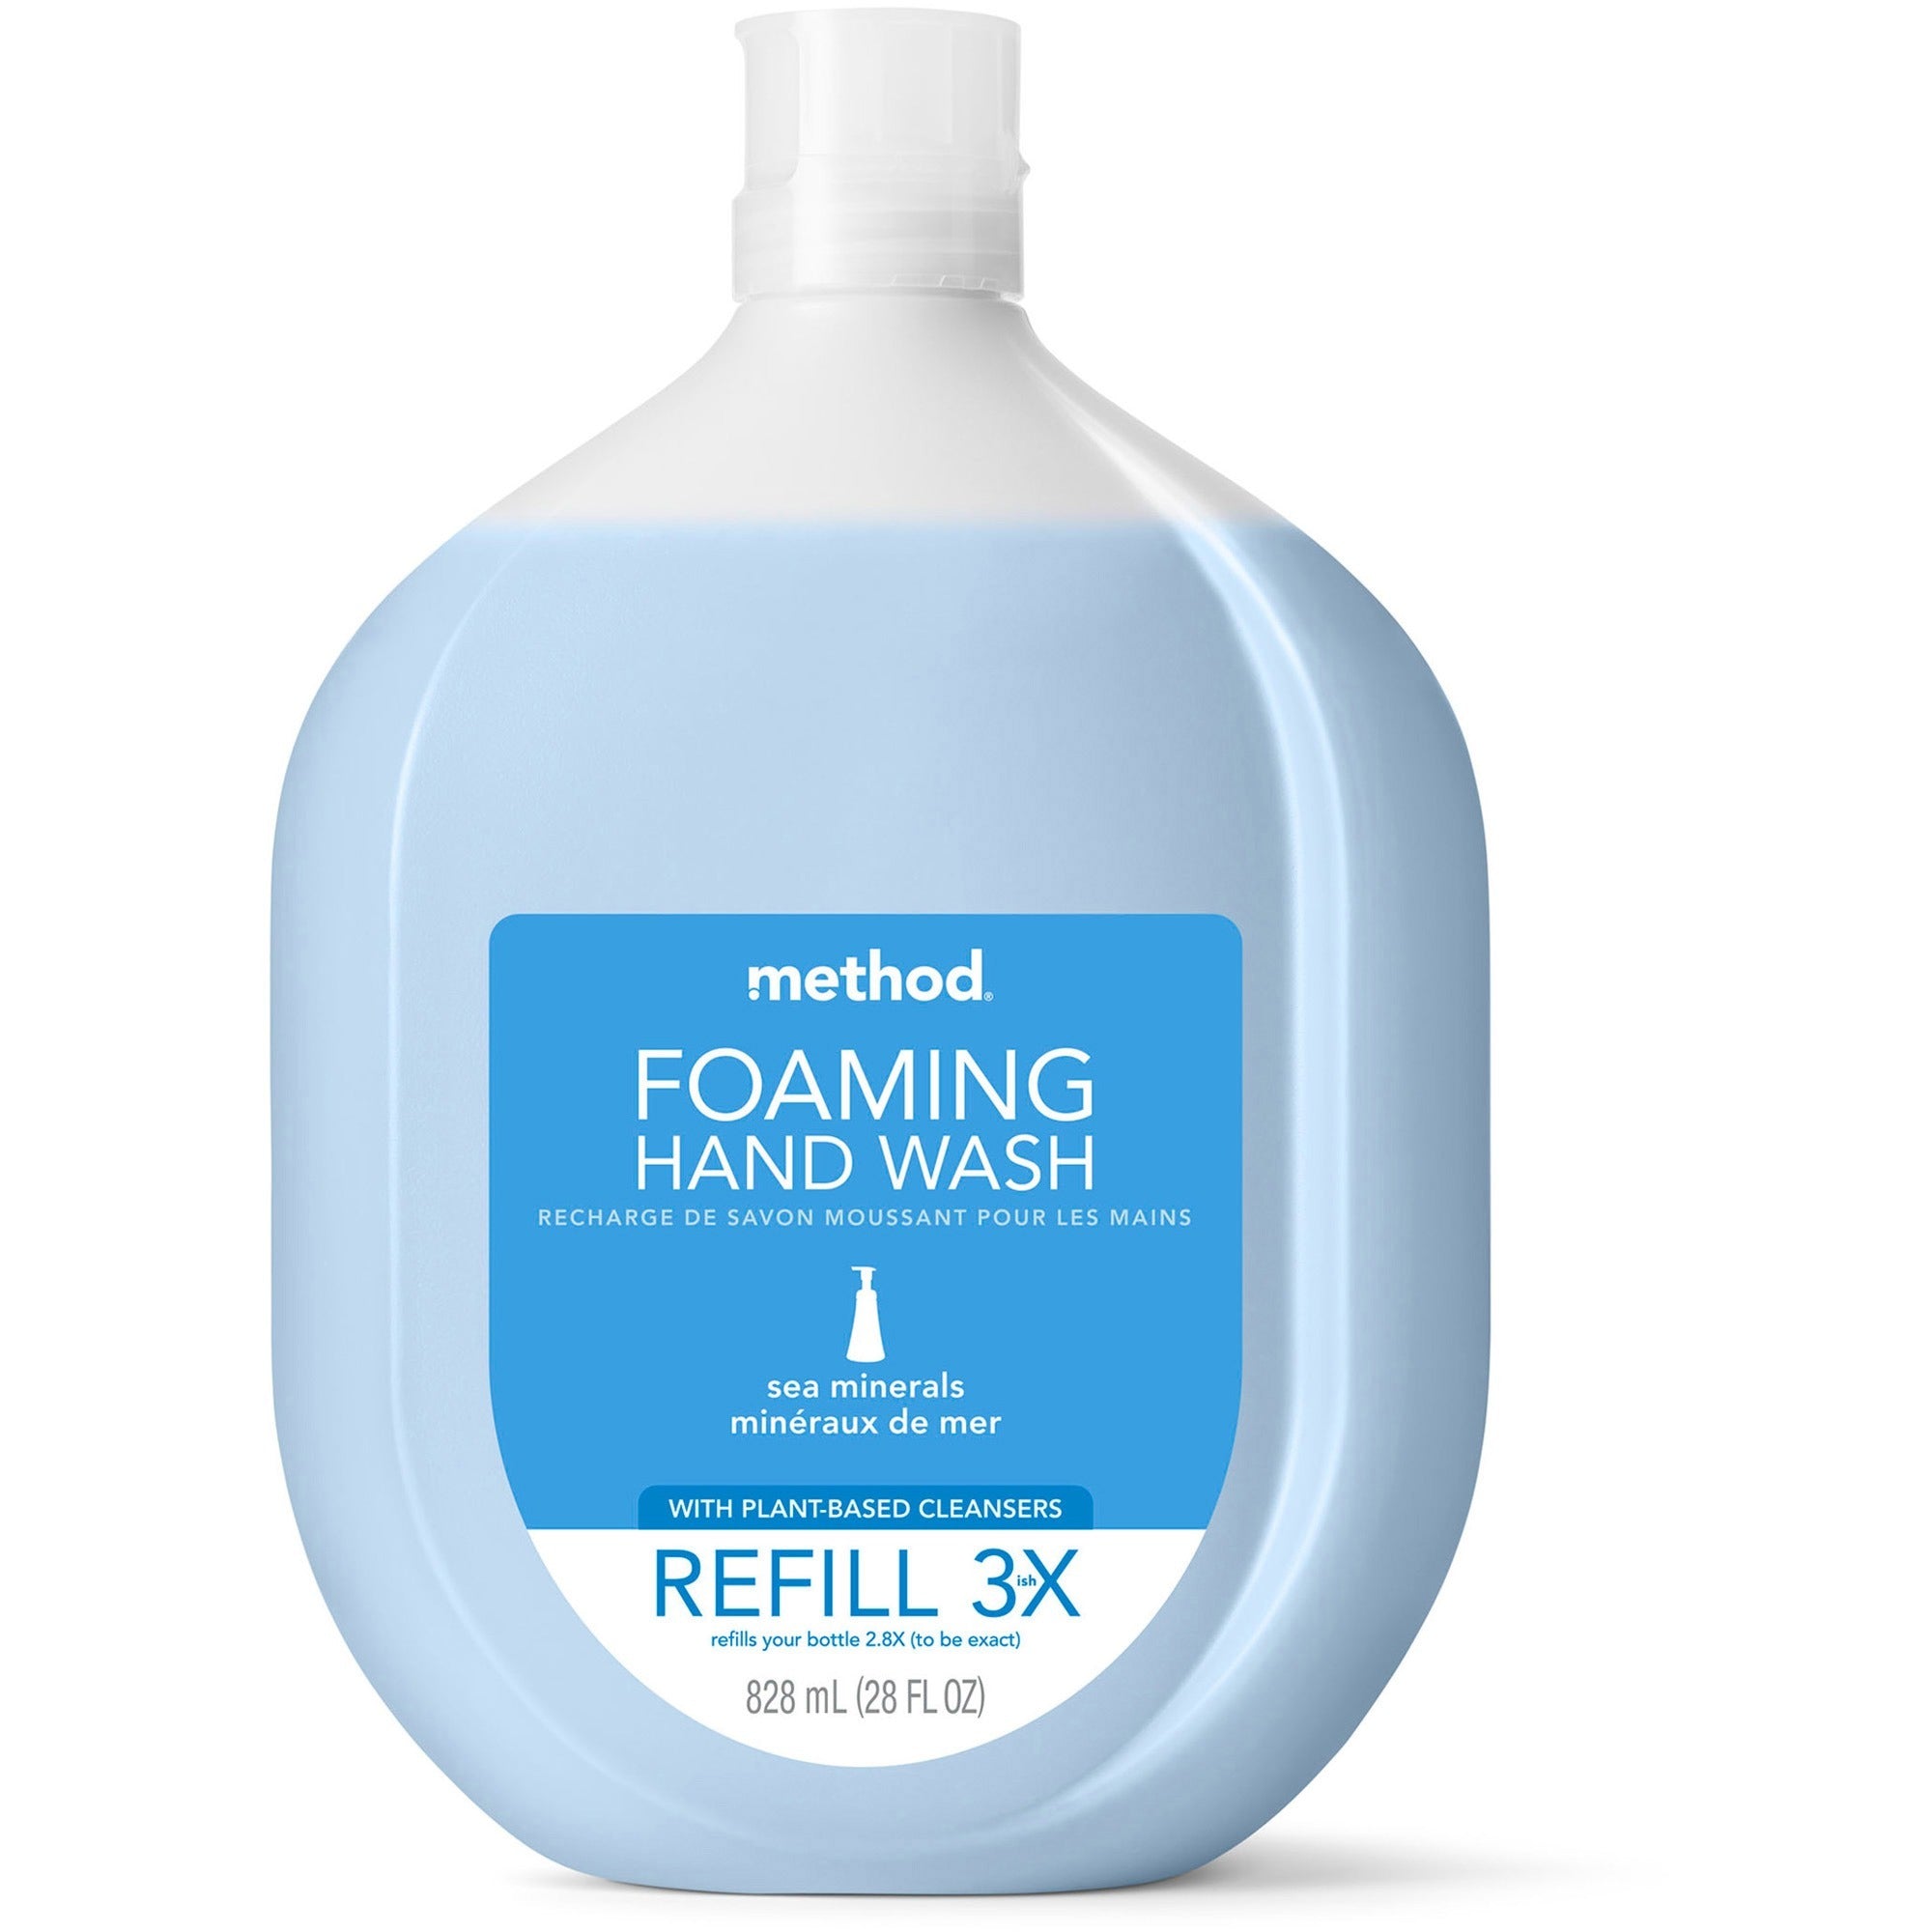 method-foaming-hand-soap-refill-sea-mineral-scentfor-28-fl-oz-8281-ml-hand-light-blue-triclosan-free-paraben-free-phthalate-free-1-each_mth00667 - 1